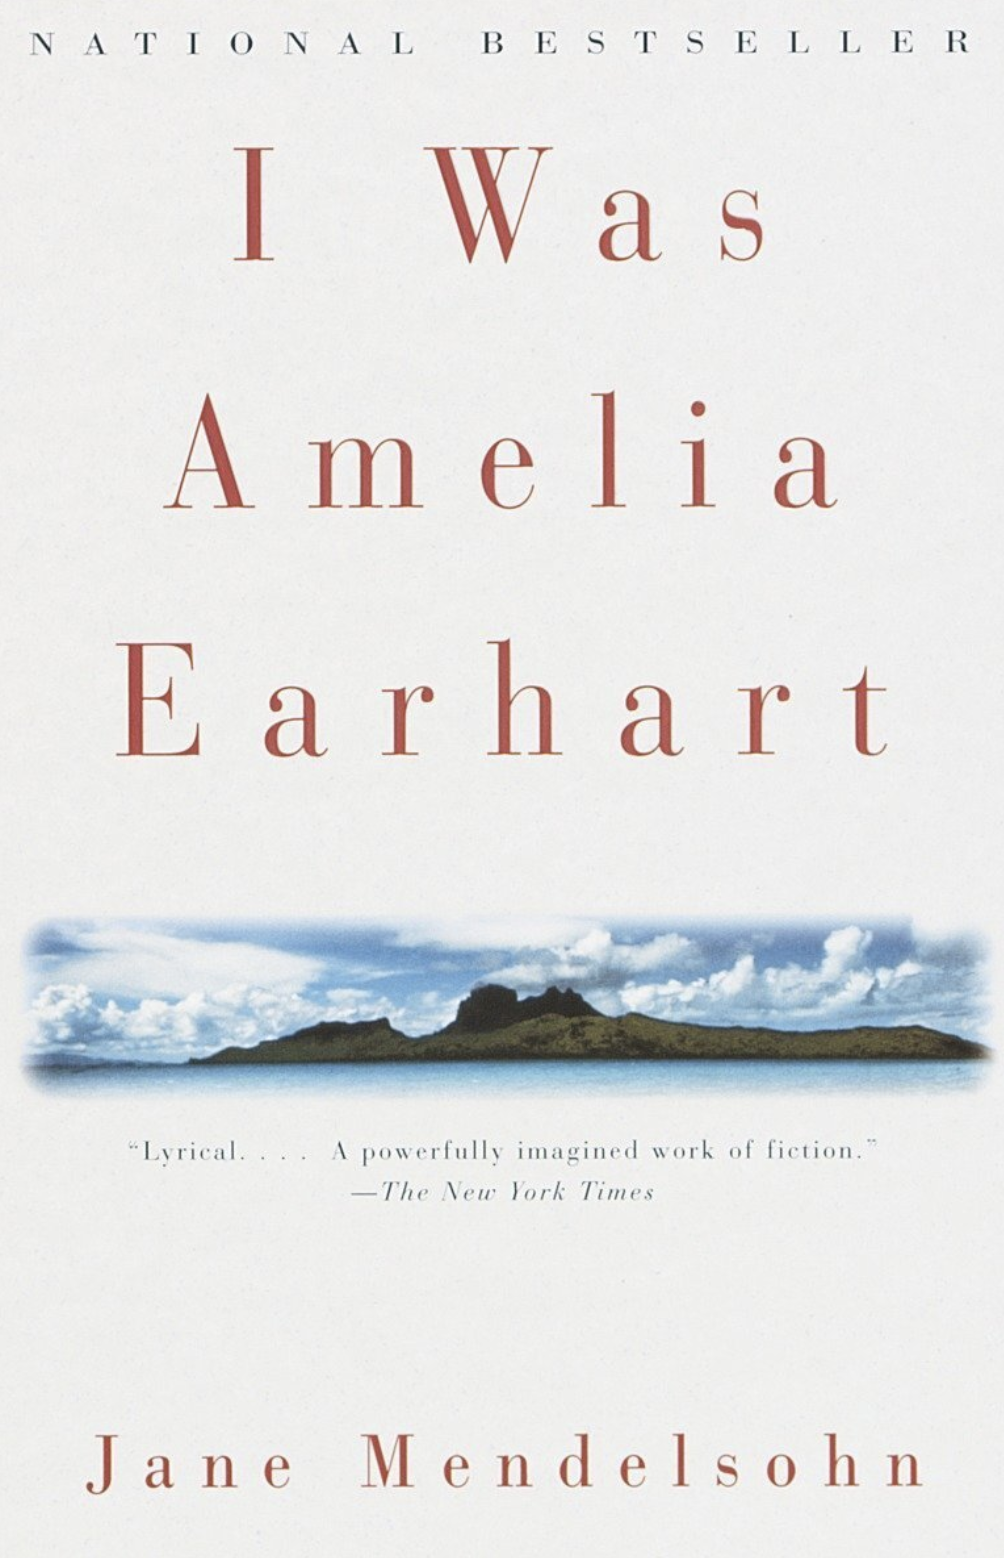 25th Anniversary Event for "I Was Amelia Earhart"